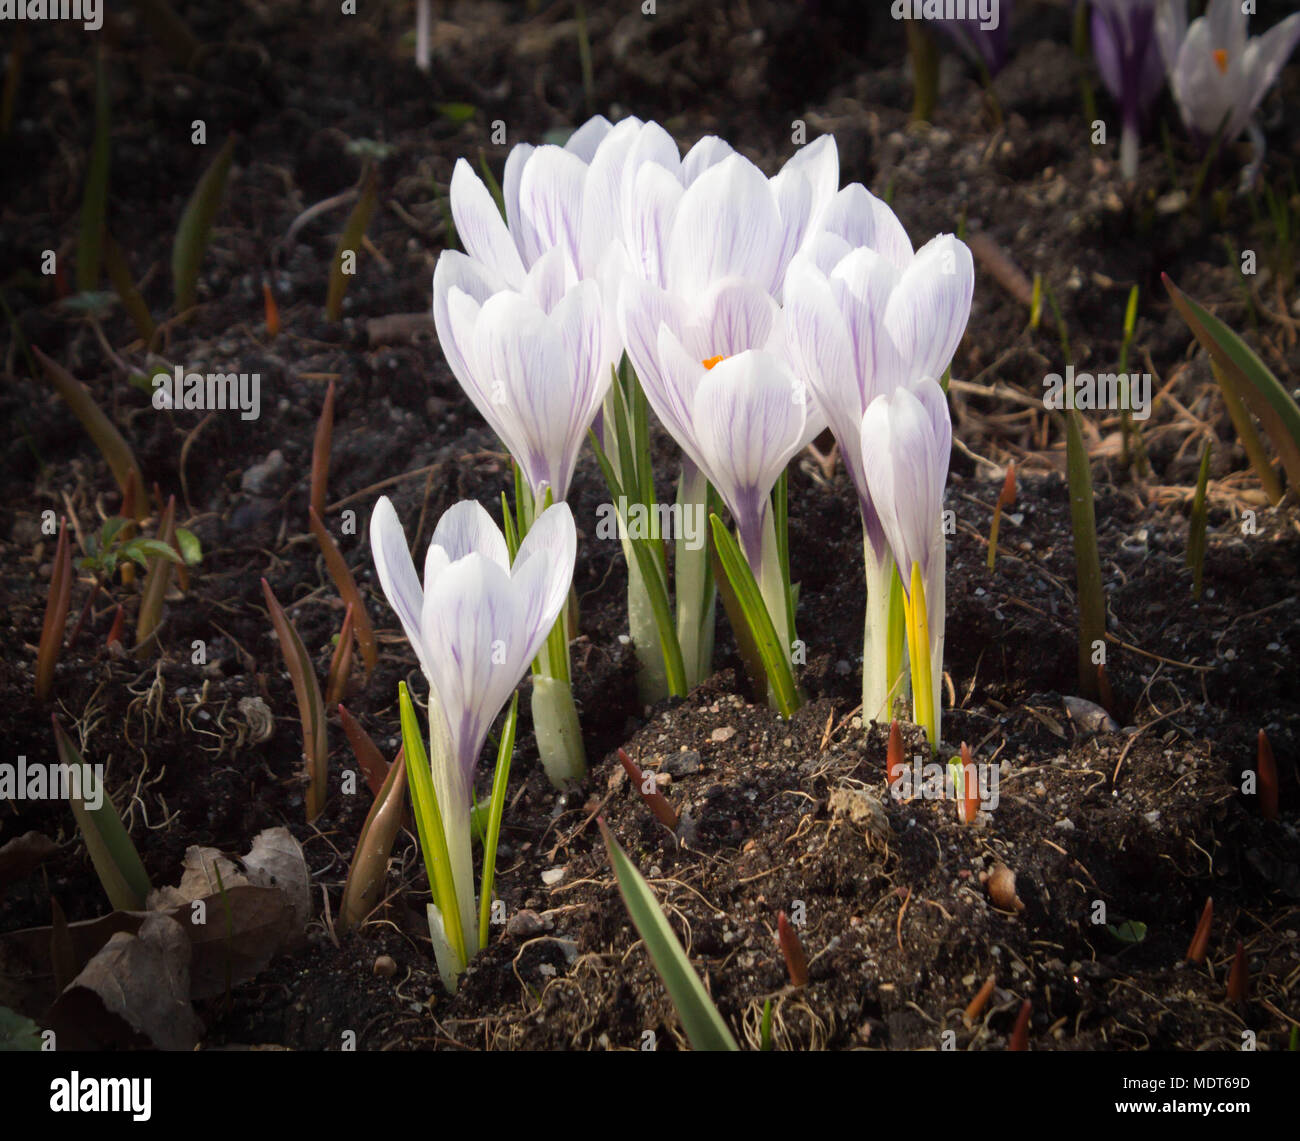 white with purple veins spring flowers crocuses grow in the ground Stock Photo